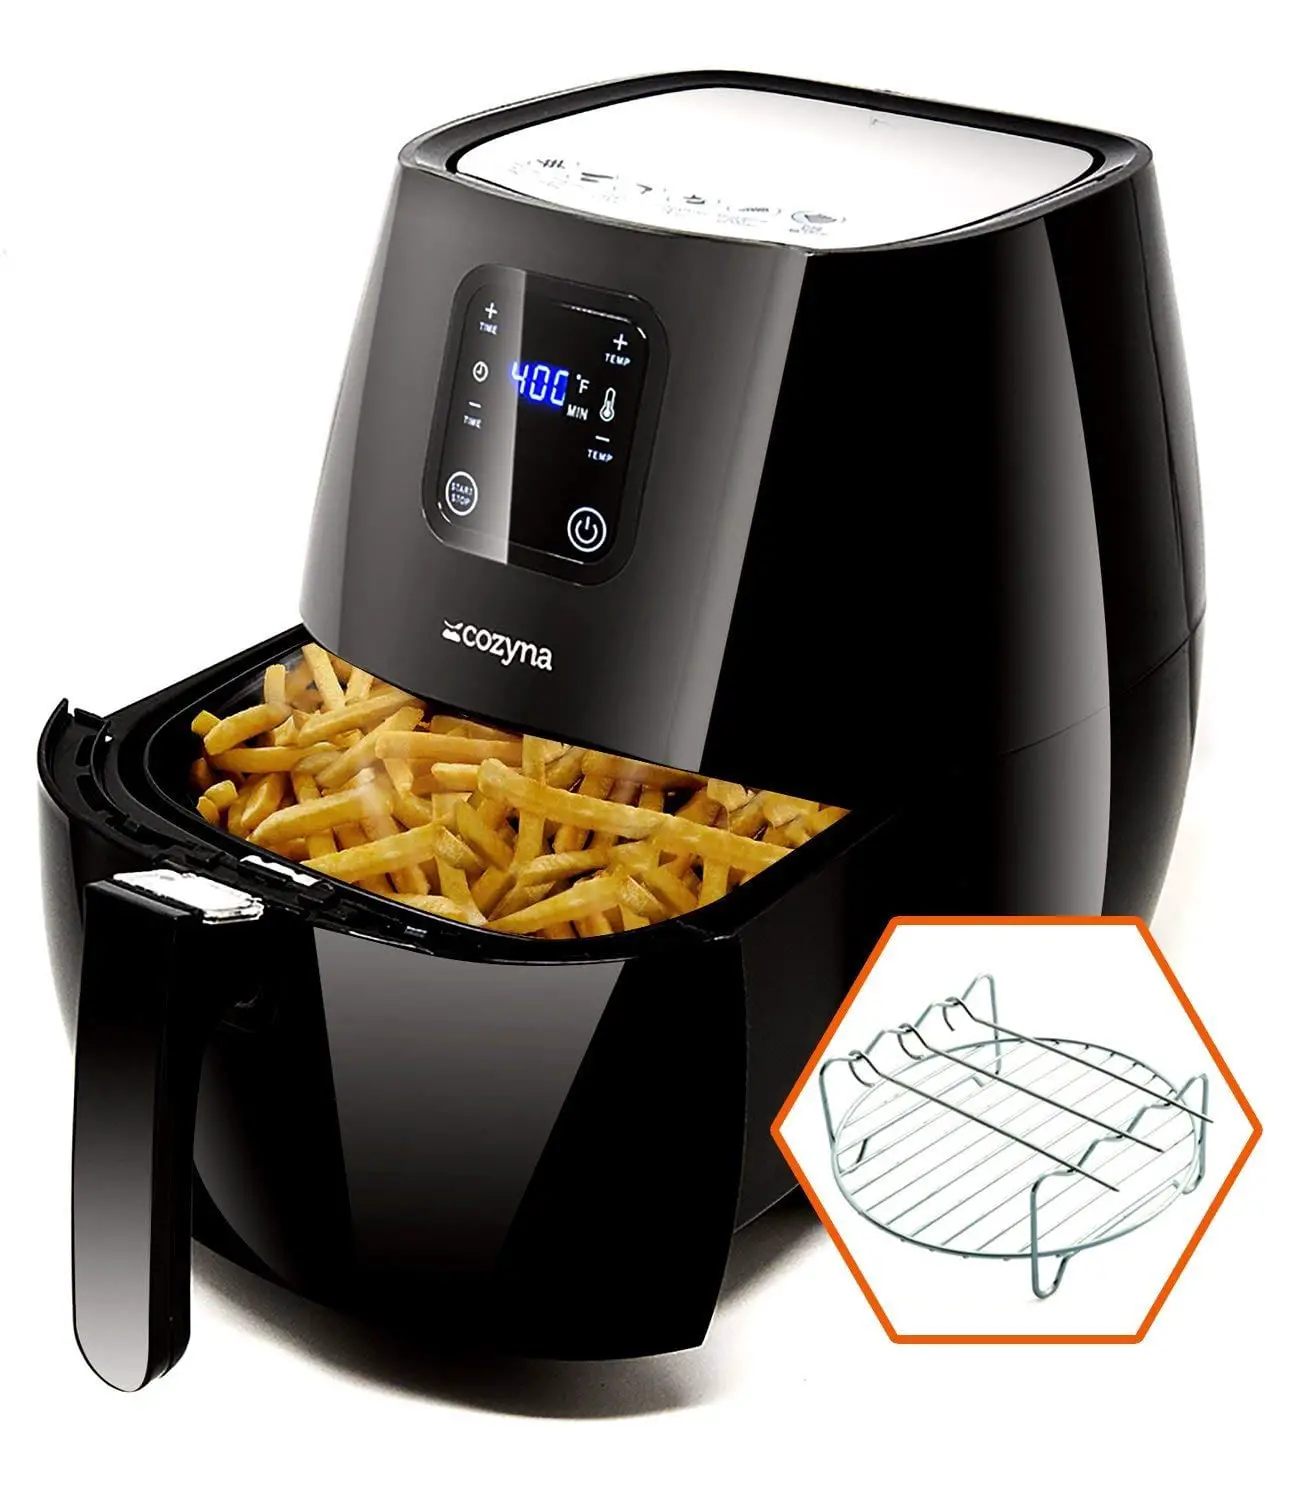 Top 10 Best Air Fryer Ovens Buying Guide [ Updated 2019 ]